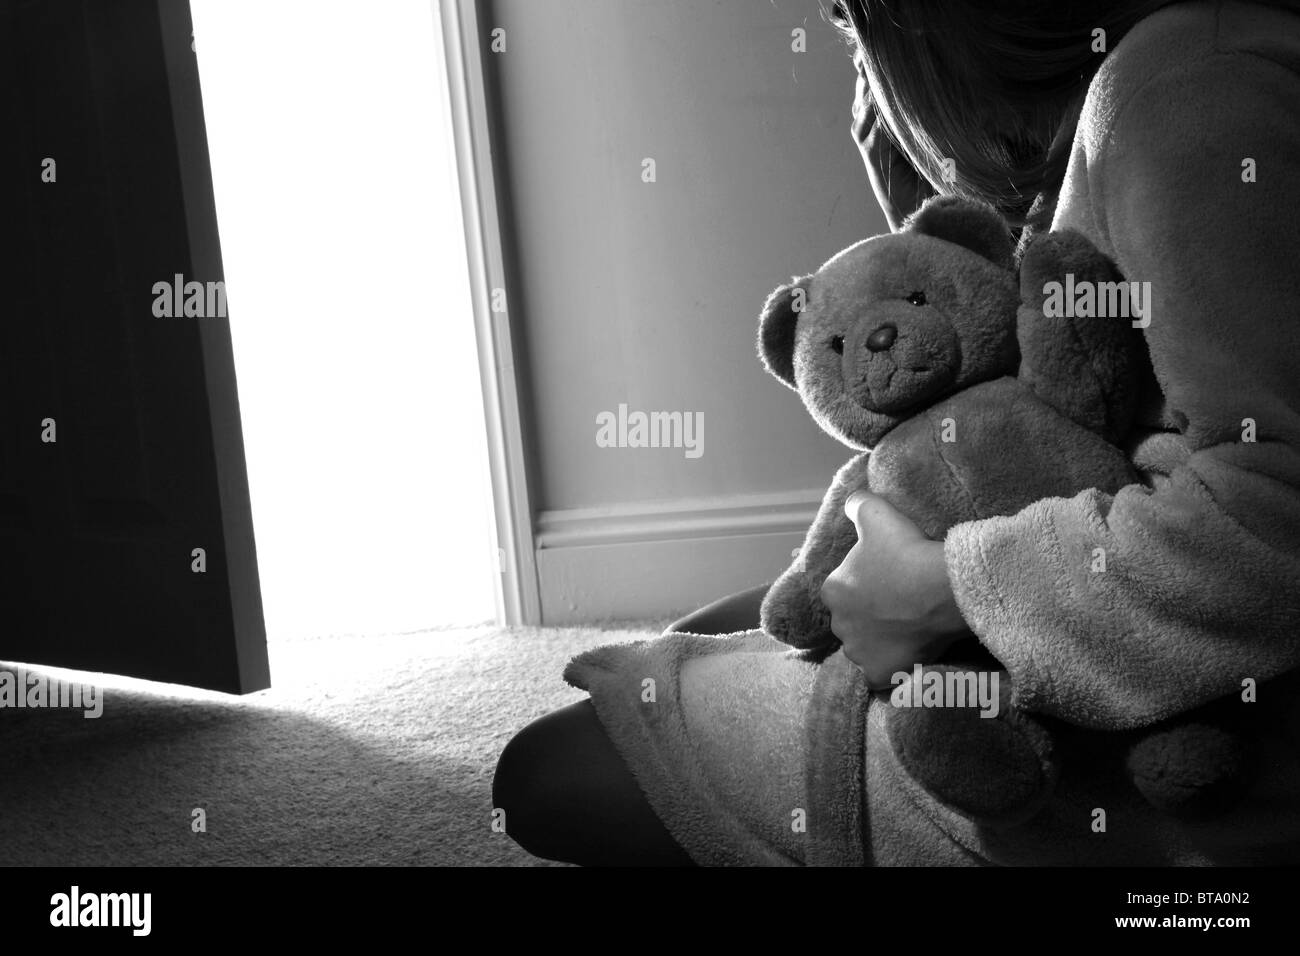 Young girl sitting holding a teddy bear, back view. Stock Photo